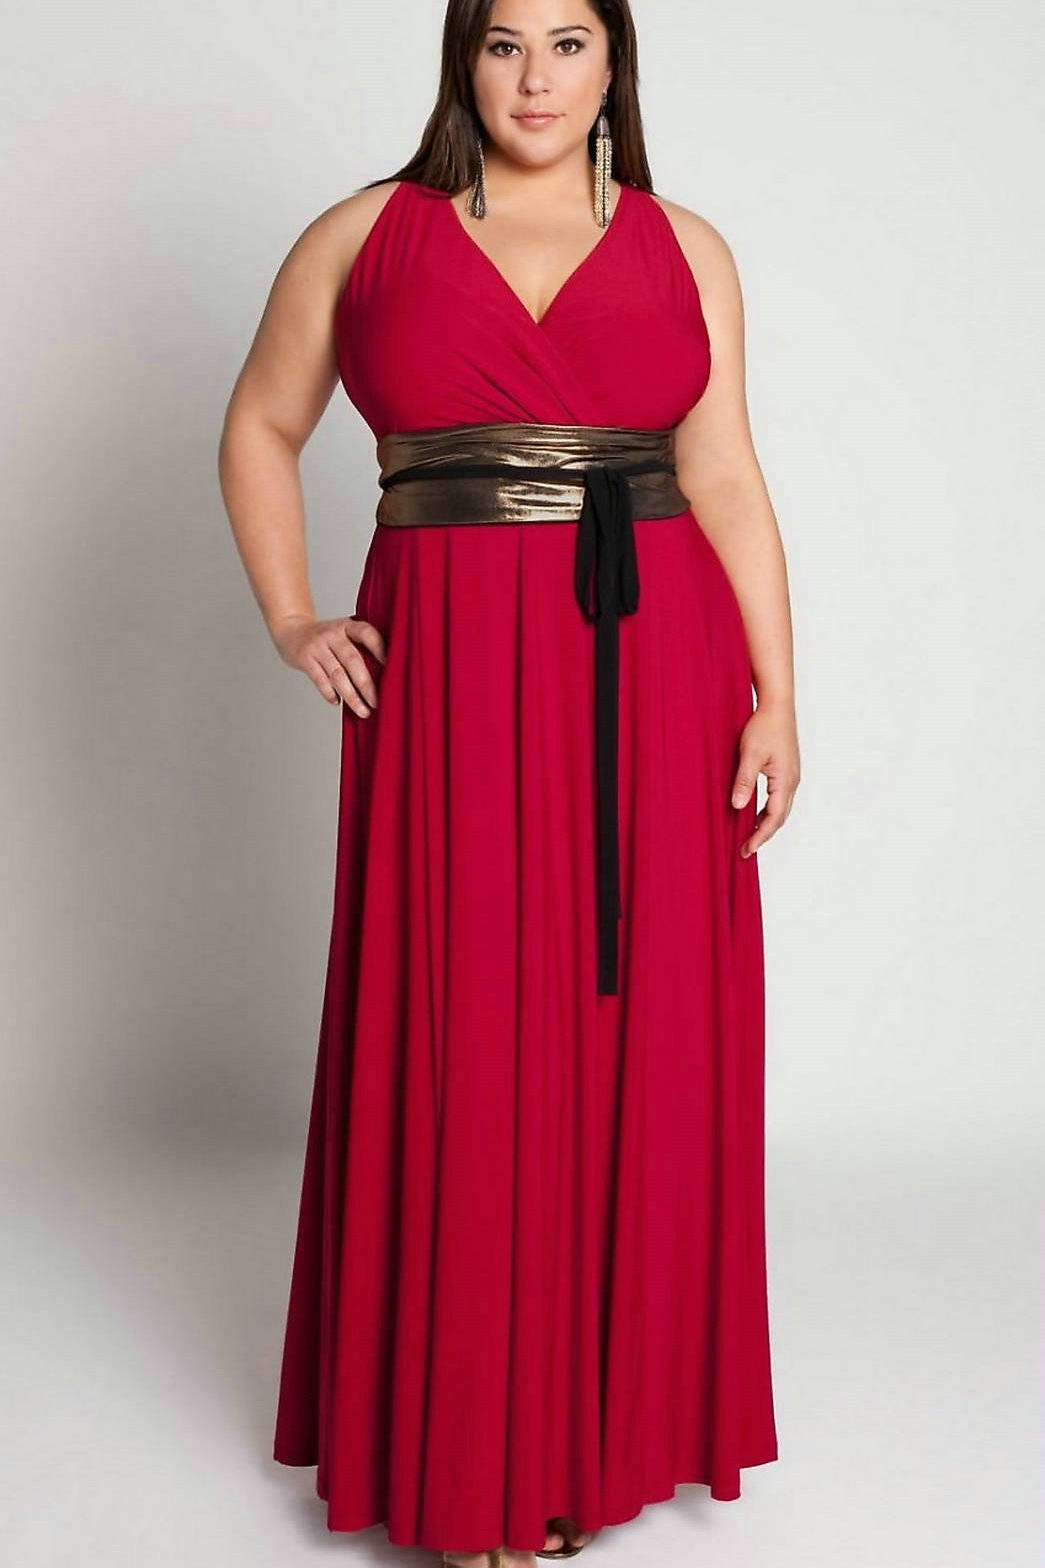 Something Related to Plus  Size  Prom  Dresses  Gowns  Fashion 